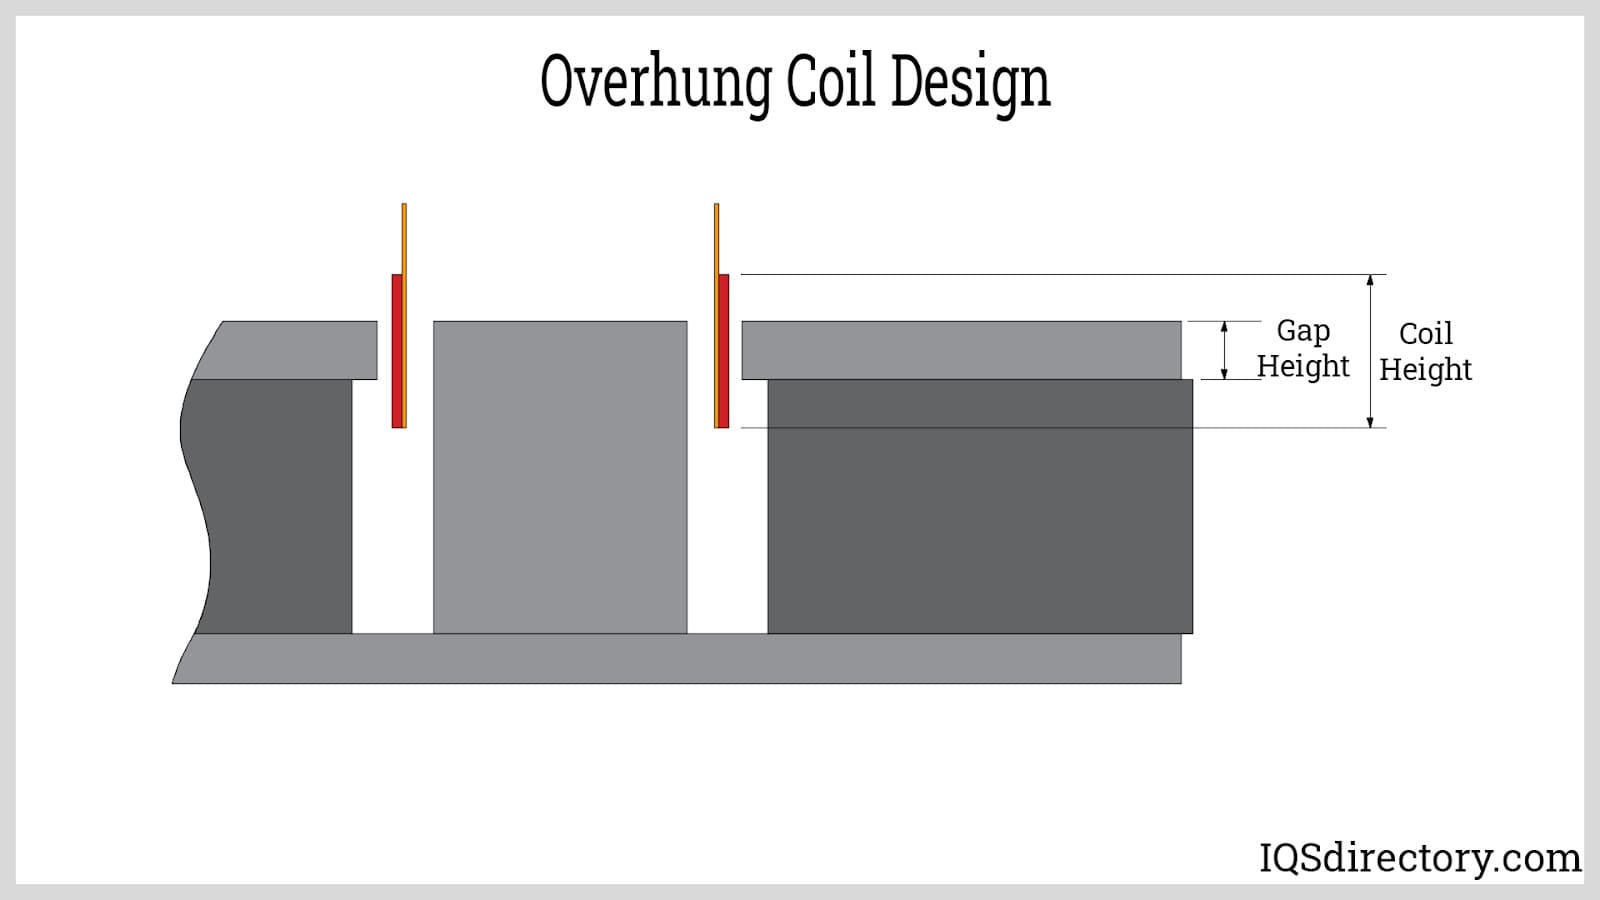 Overhung Coil Design